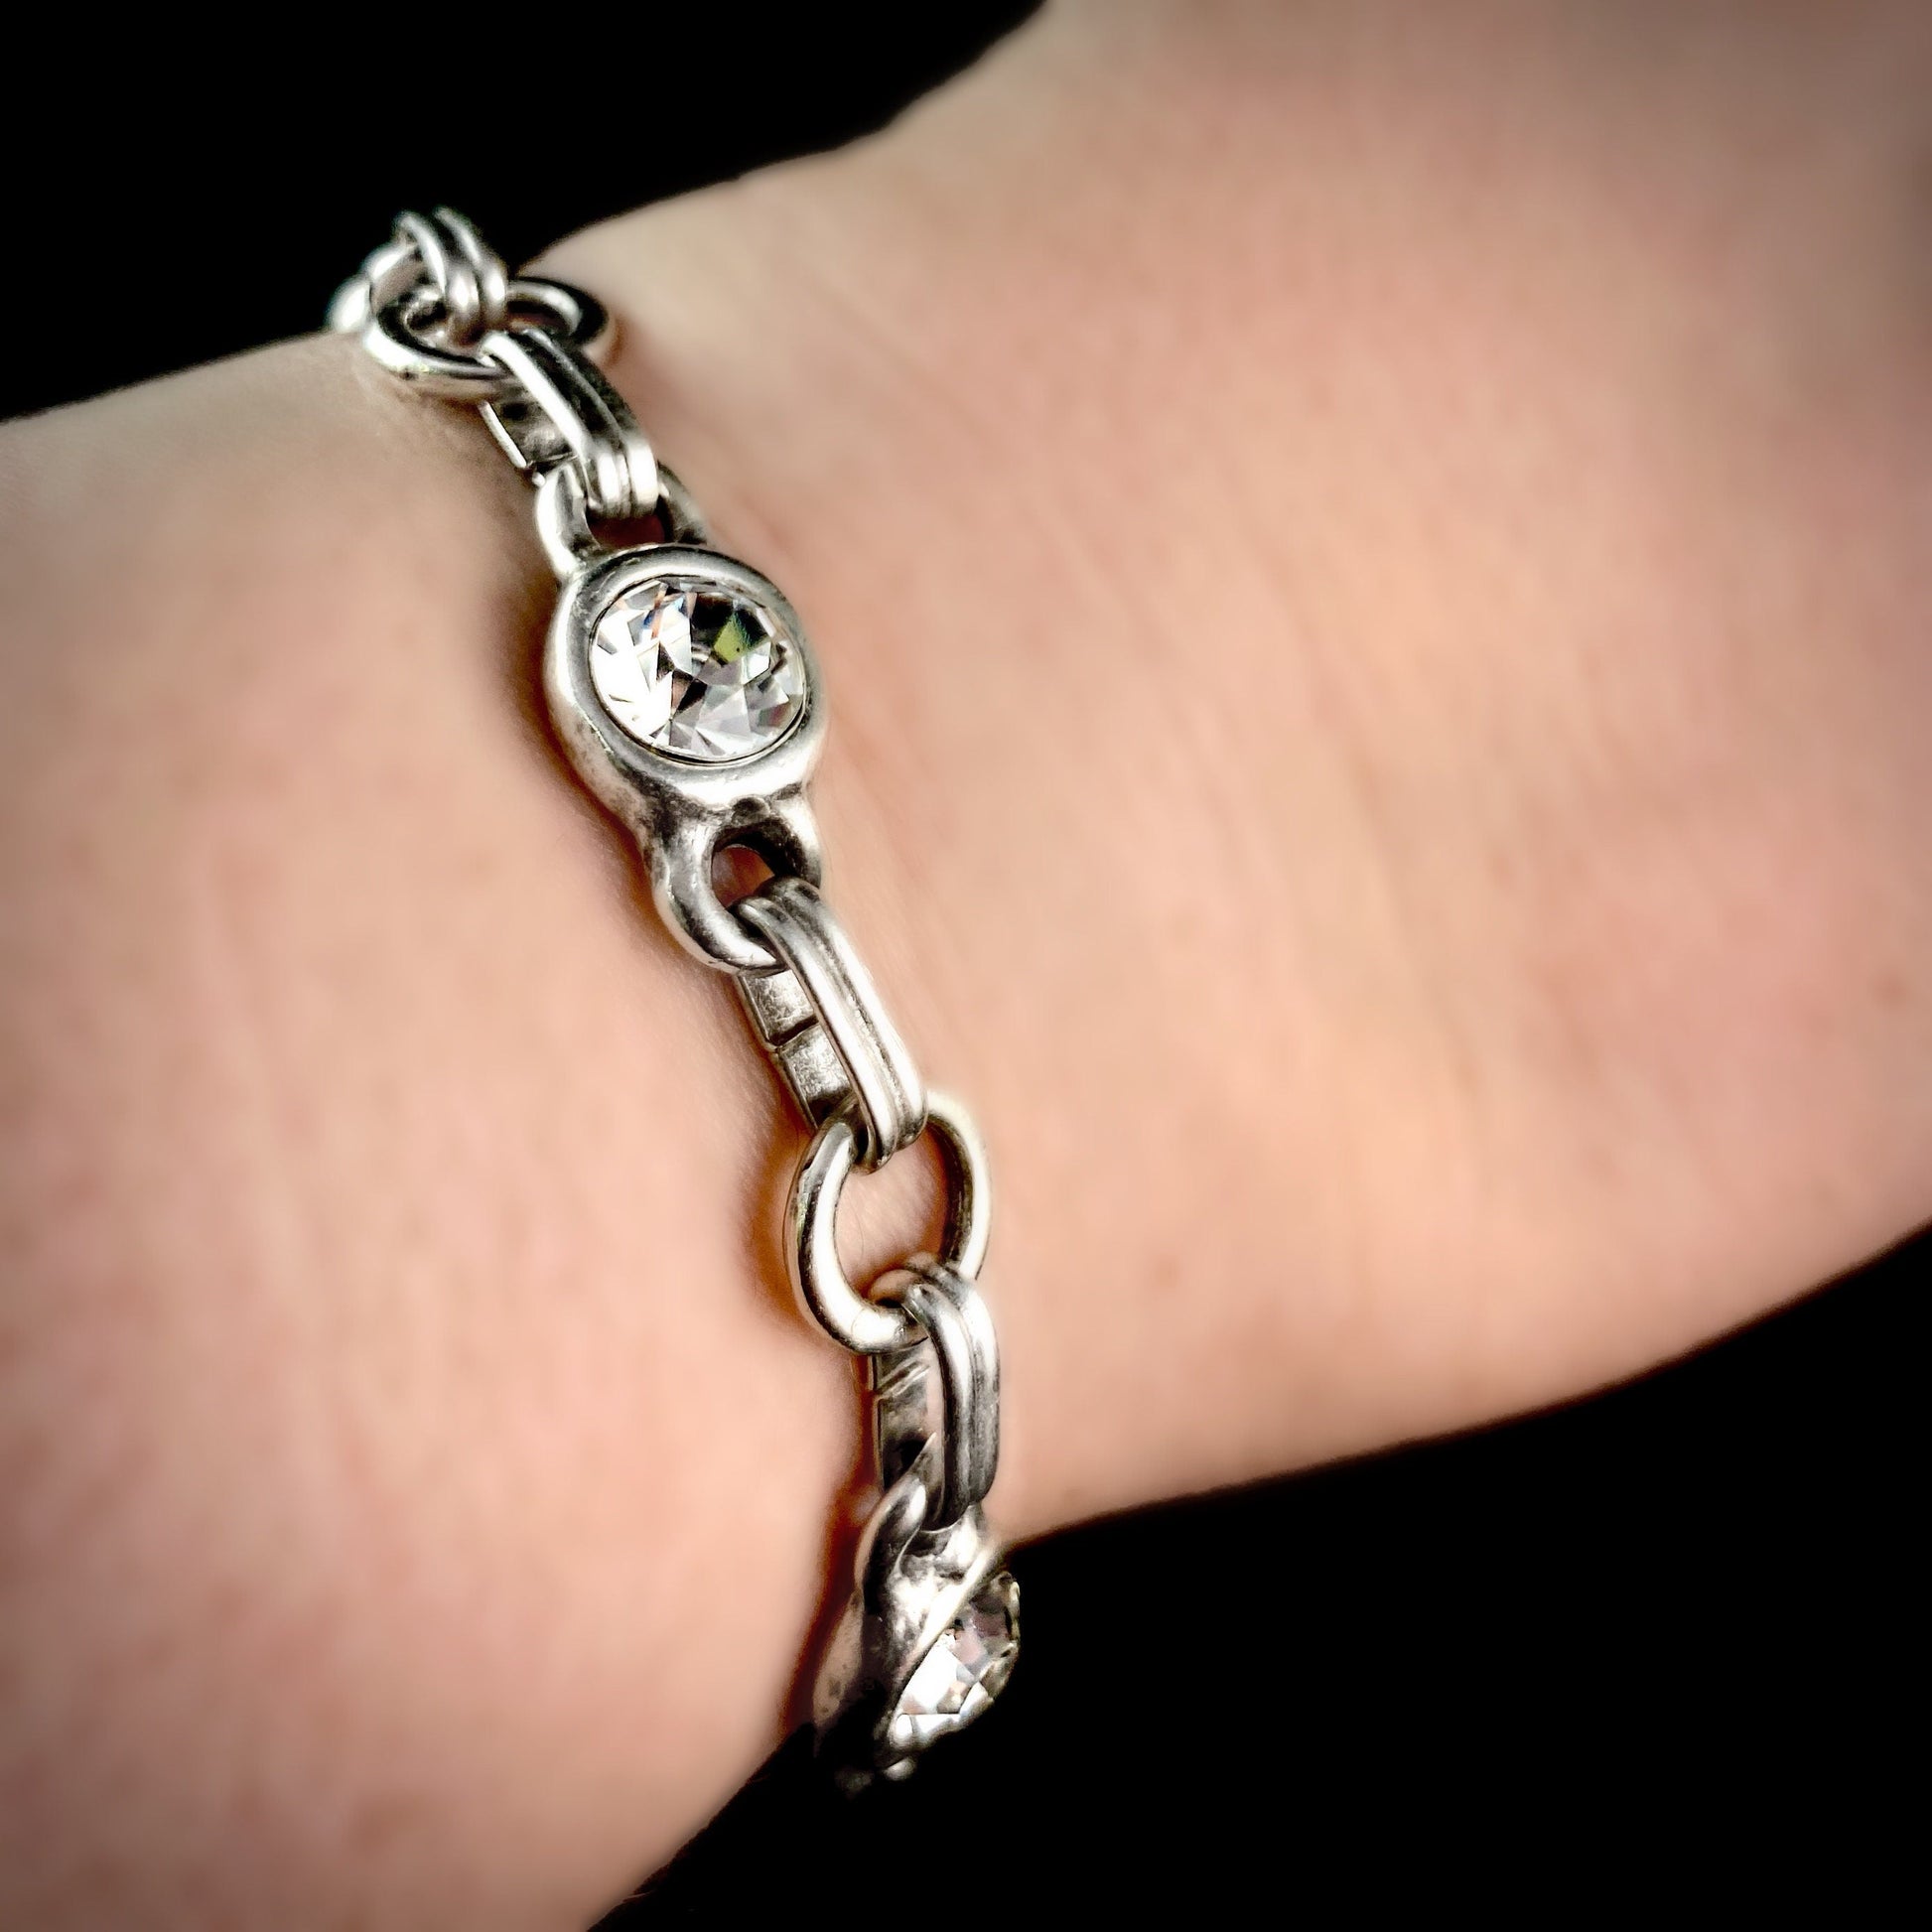 Silver Chain Bracelet with Clear Crystal Accents and Claw Closure, Handmade, Nickel Free-Noir